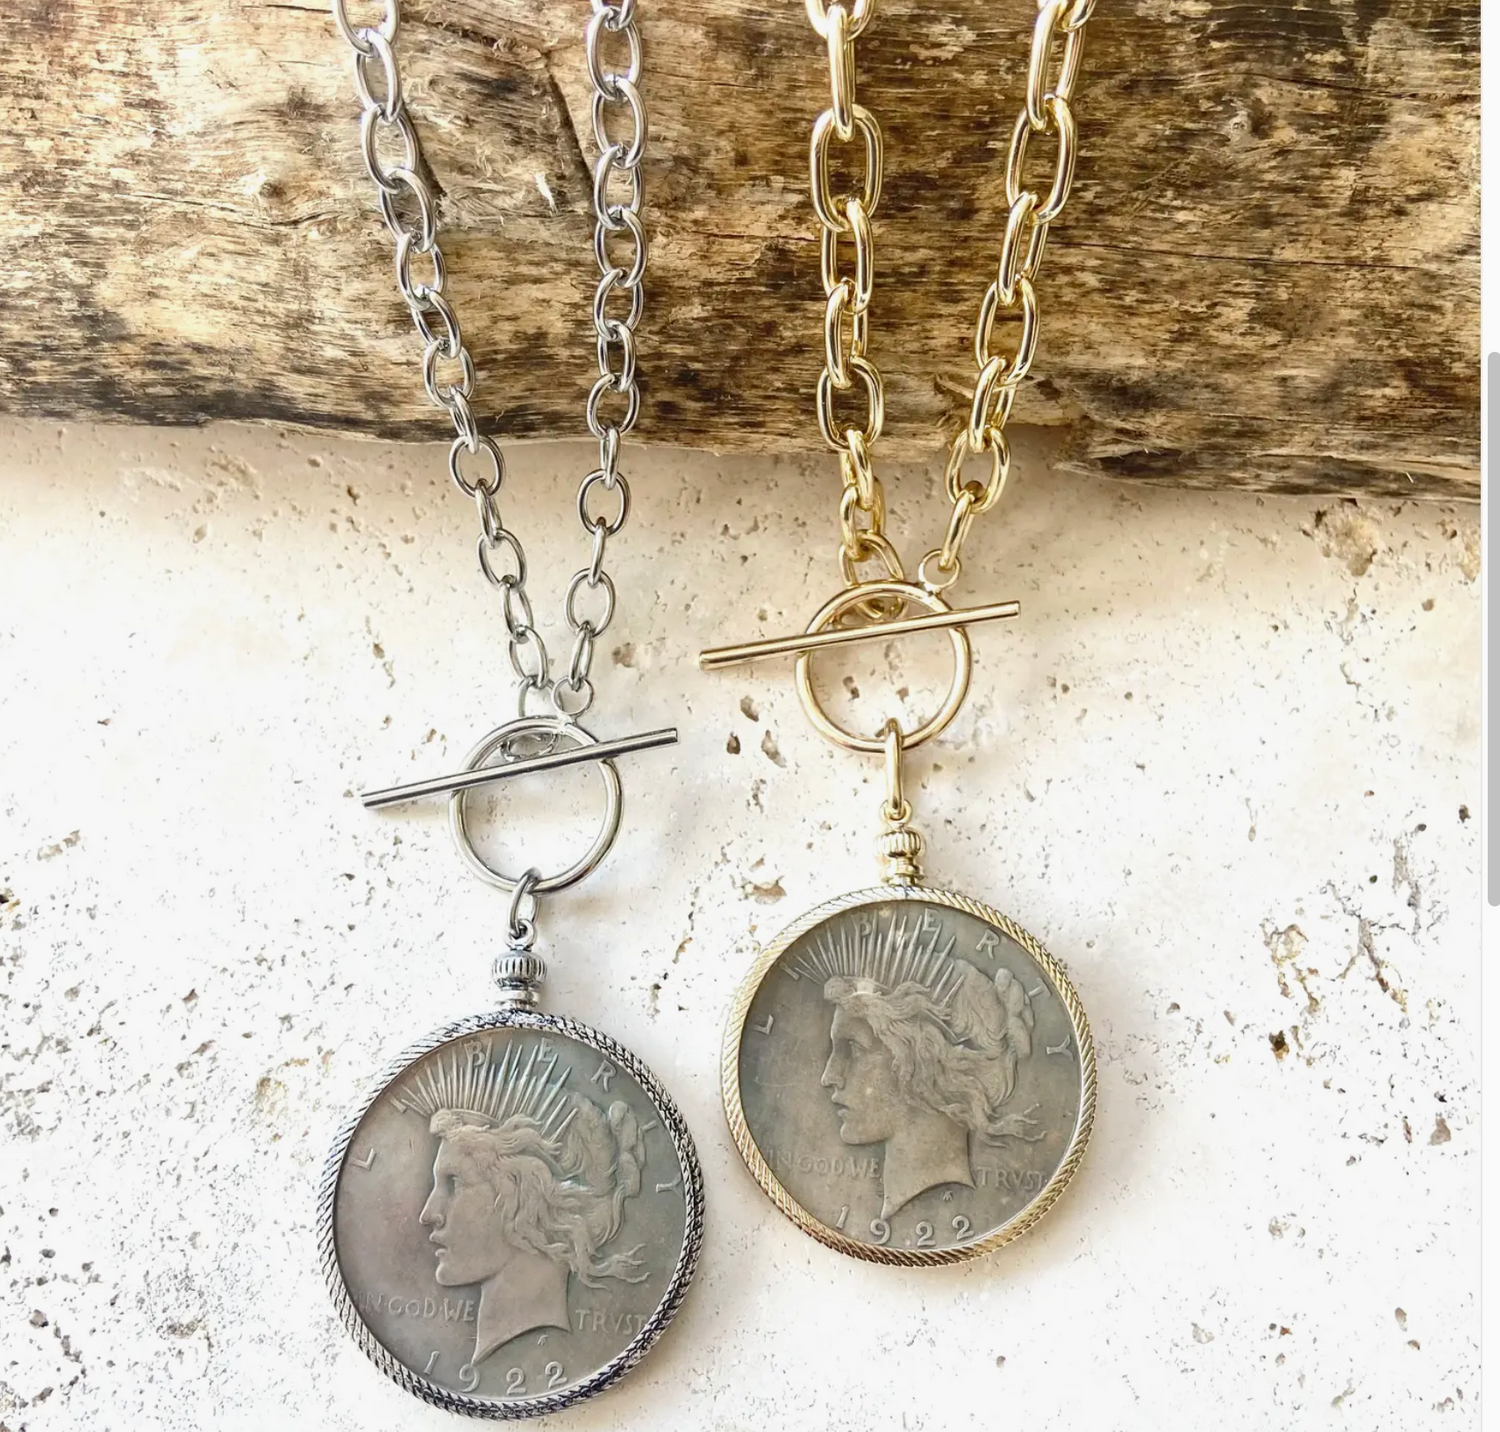 Silver and gold coin necklace